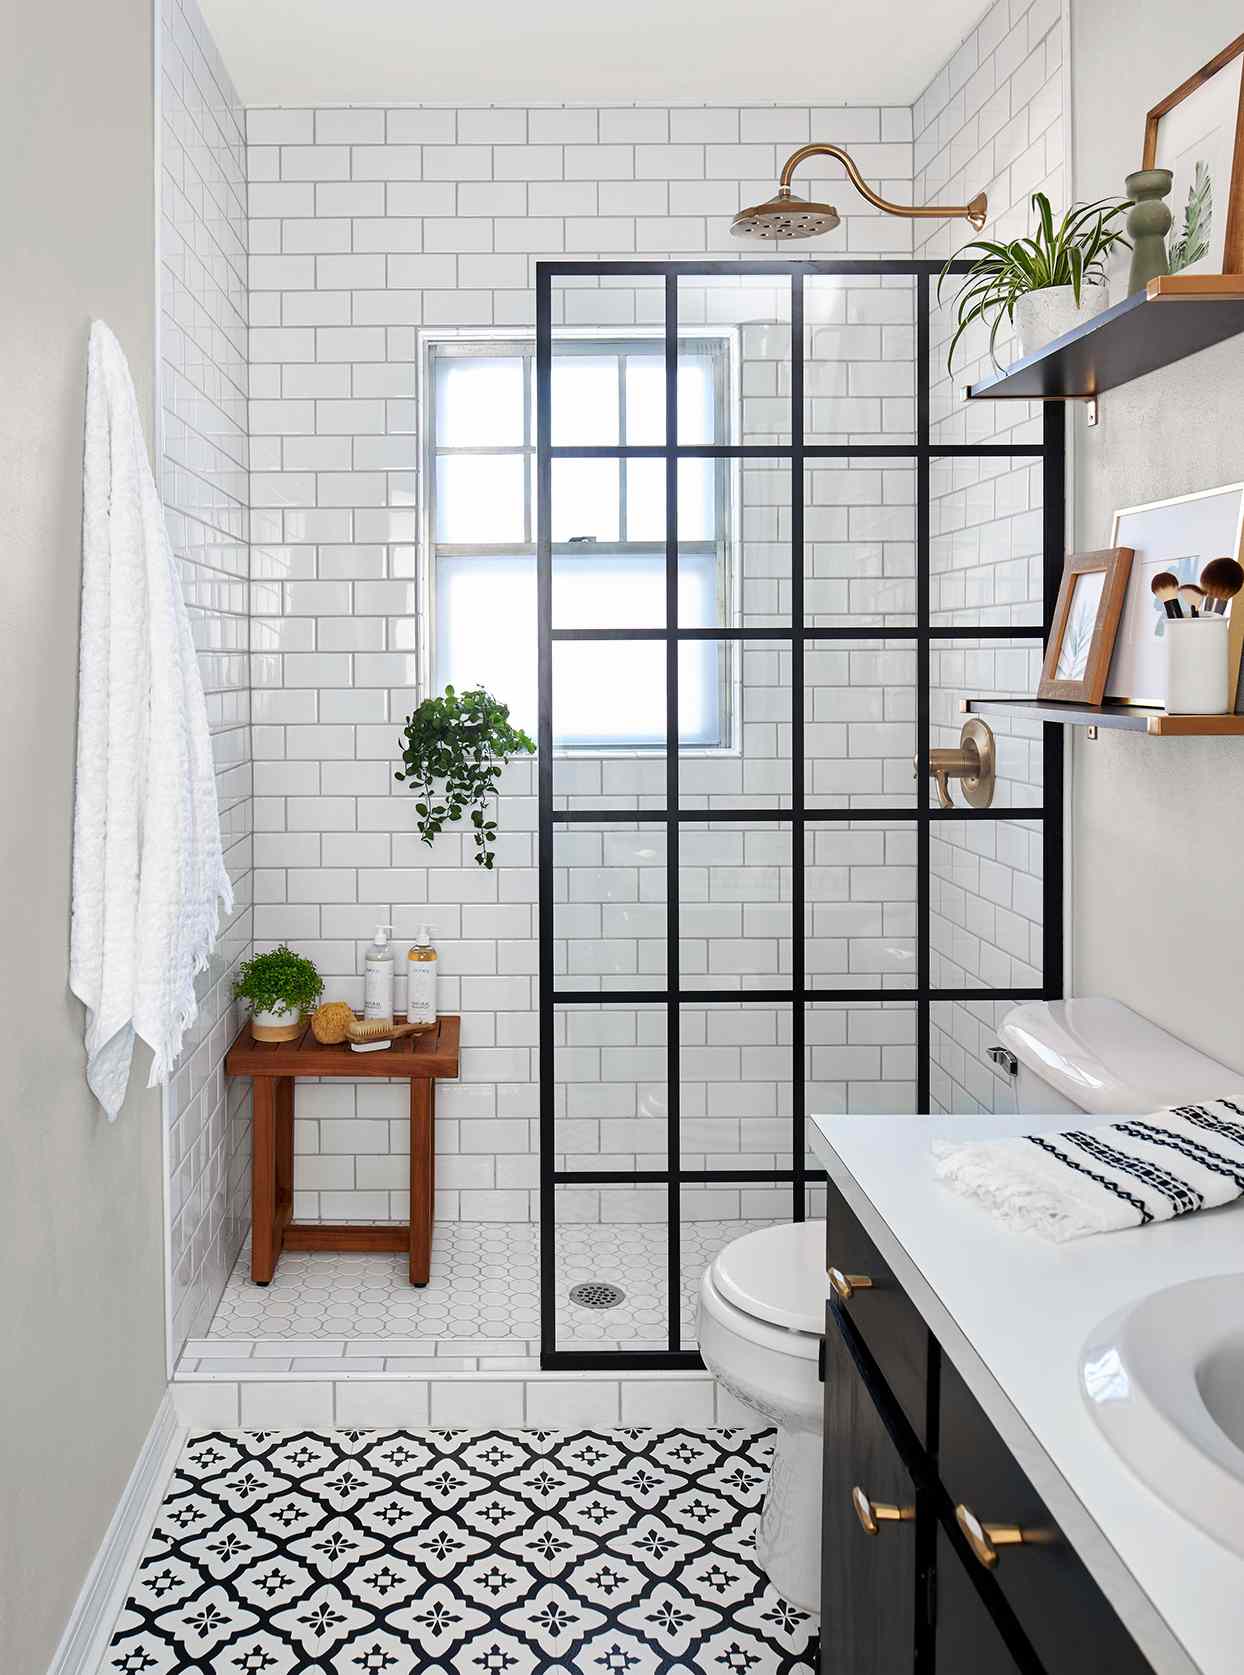 20 Stunning Walk-In Shower Ideas for Small Bathrooms 